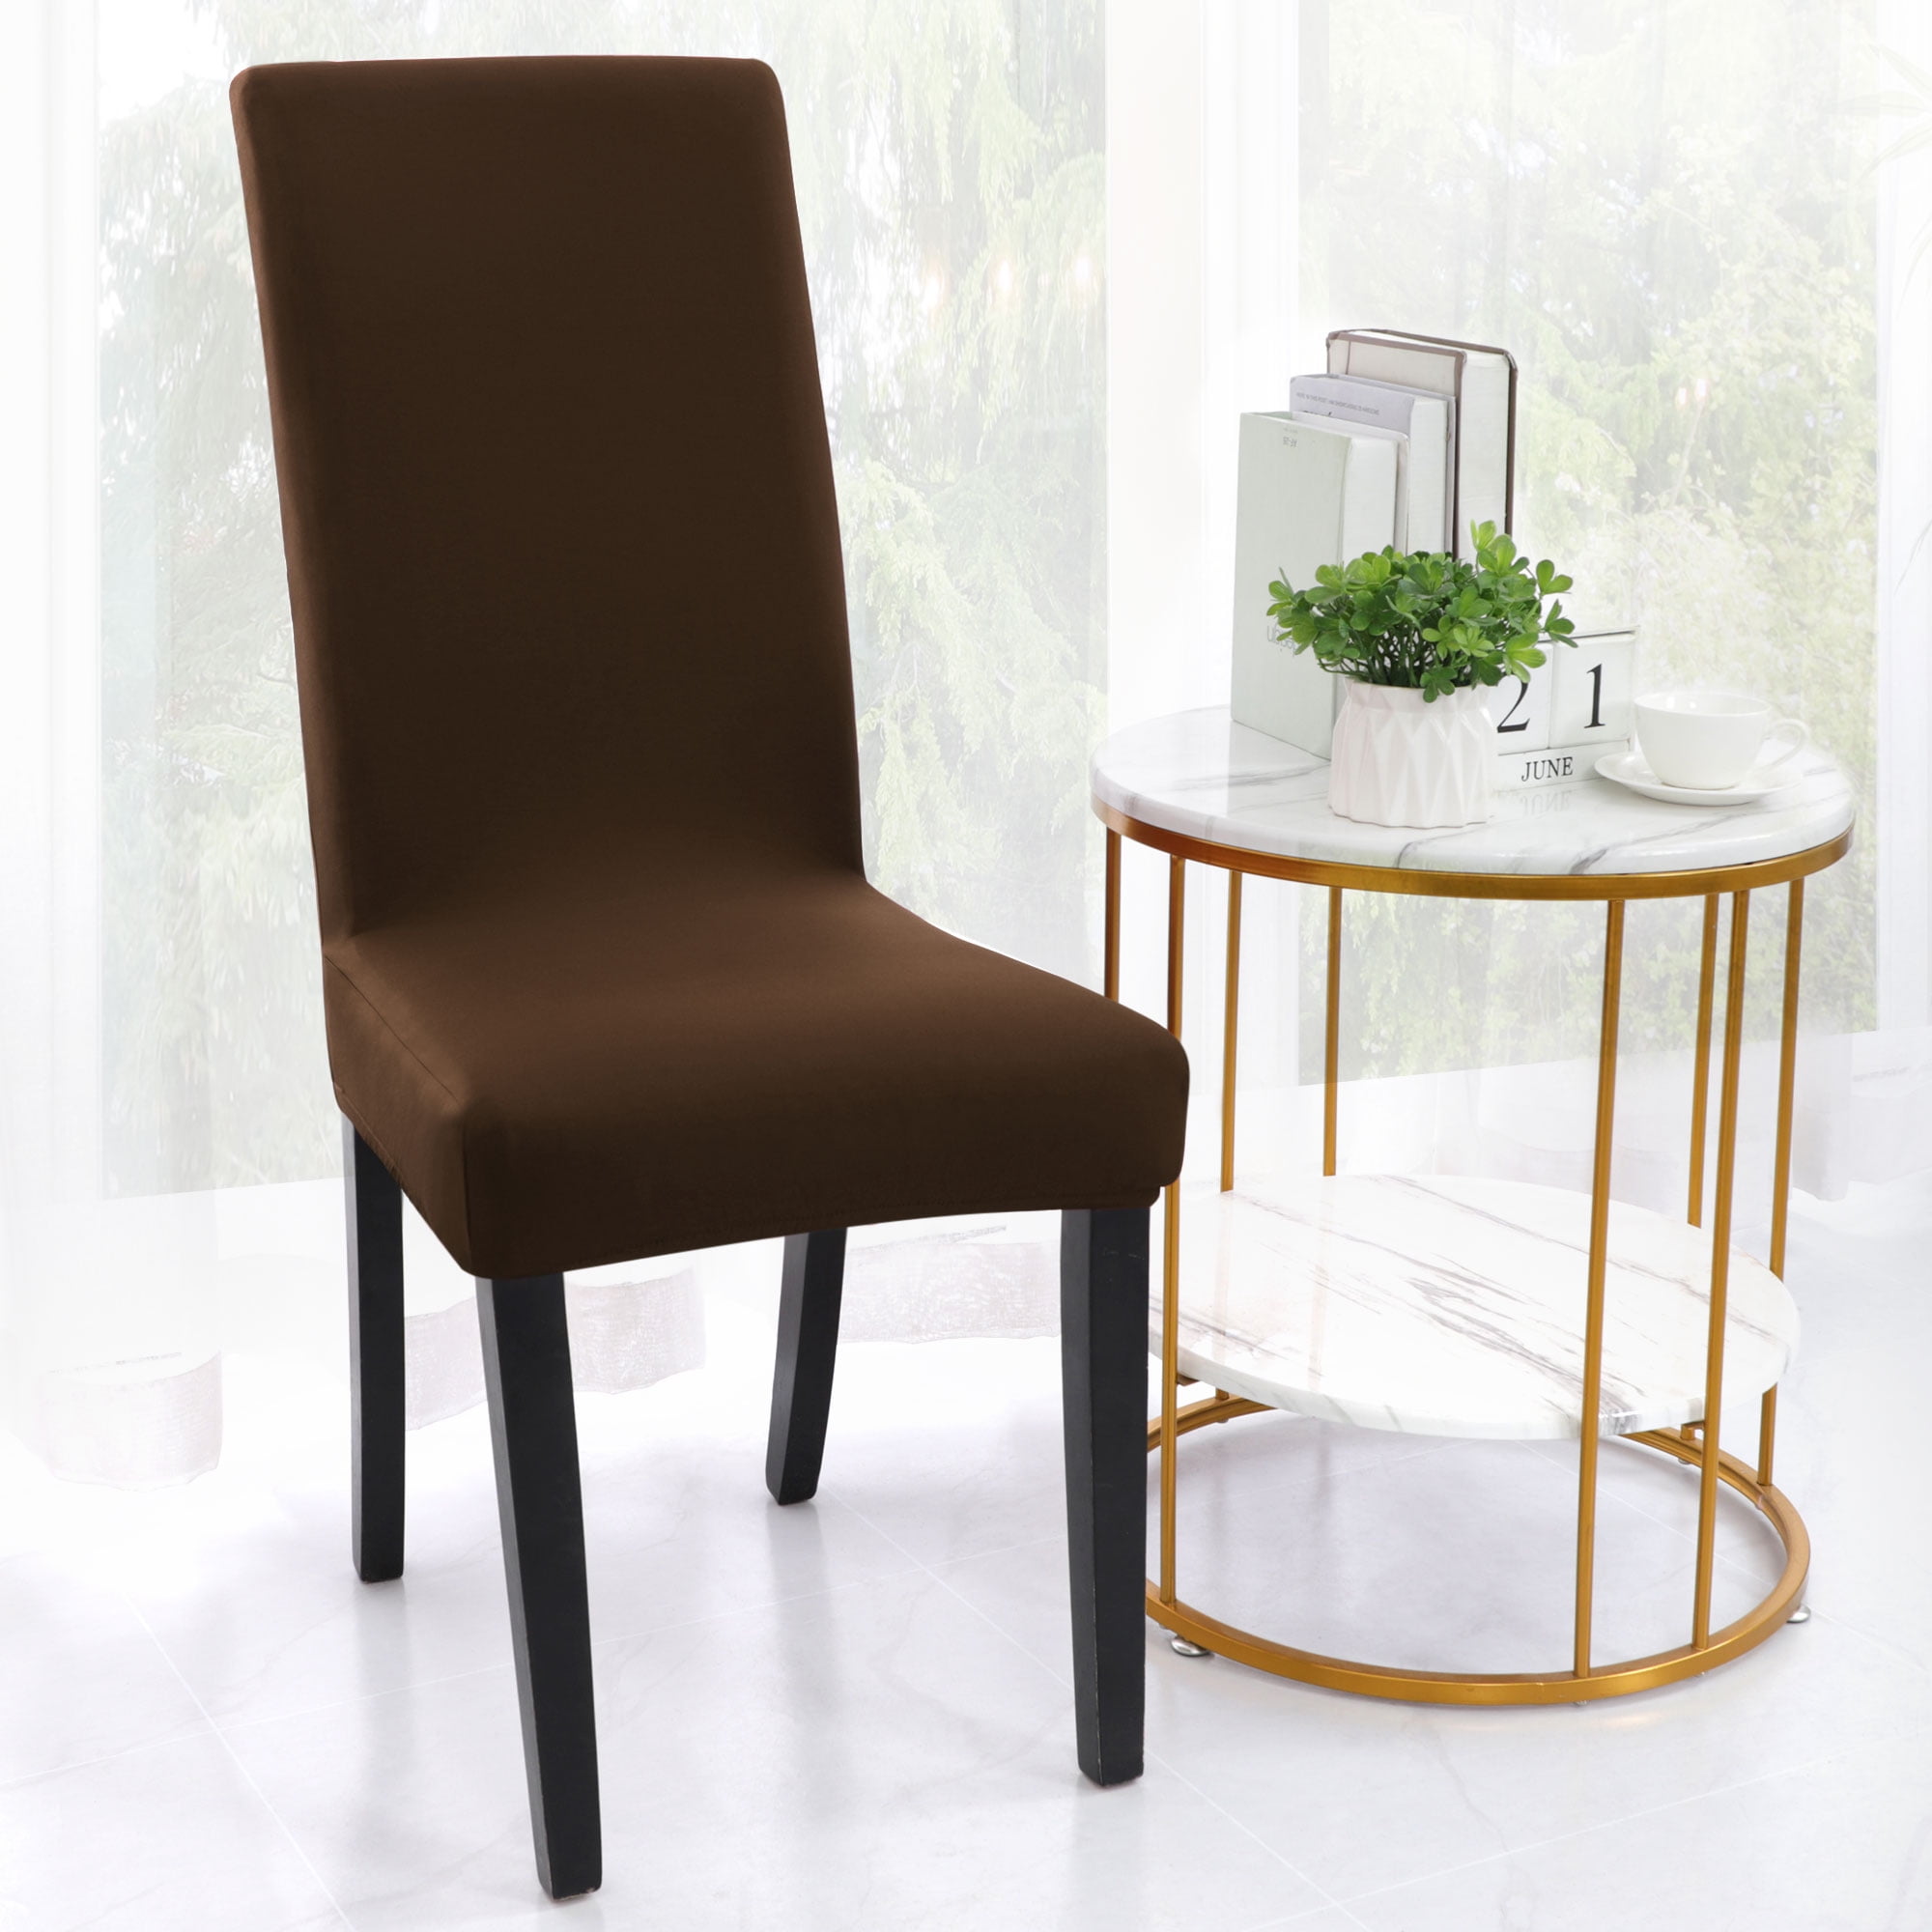 Details about   Dustproof Home Restaurant Stool Chair Cover Dining Room Bar Furniture Removable 